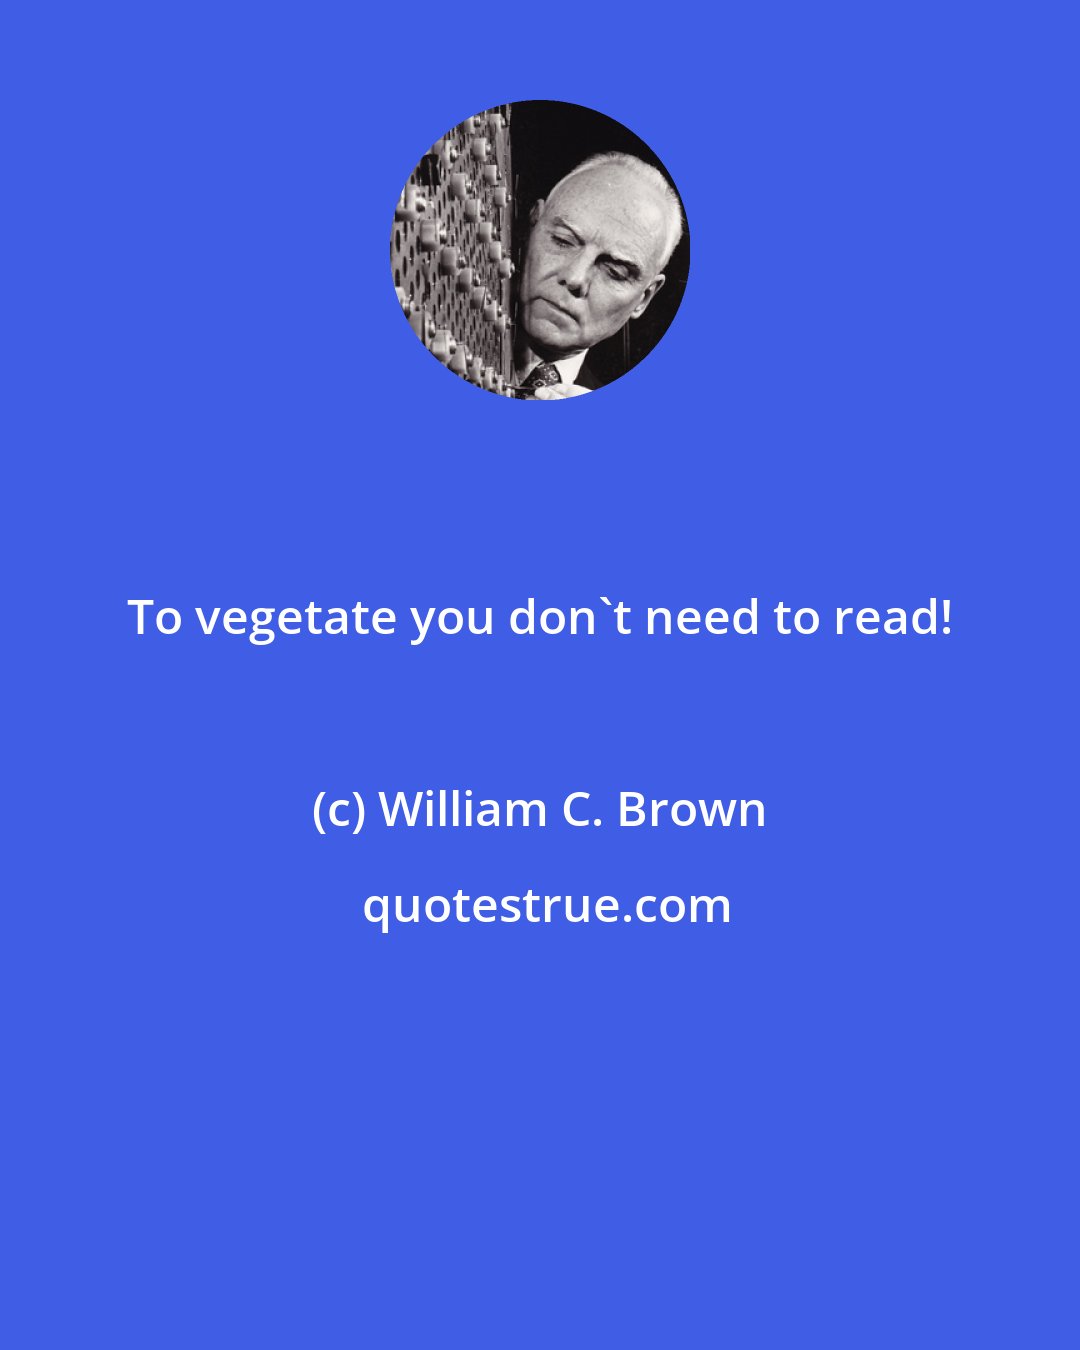 William C. Brown: To vegetate you don't need to read!